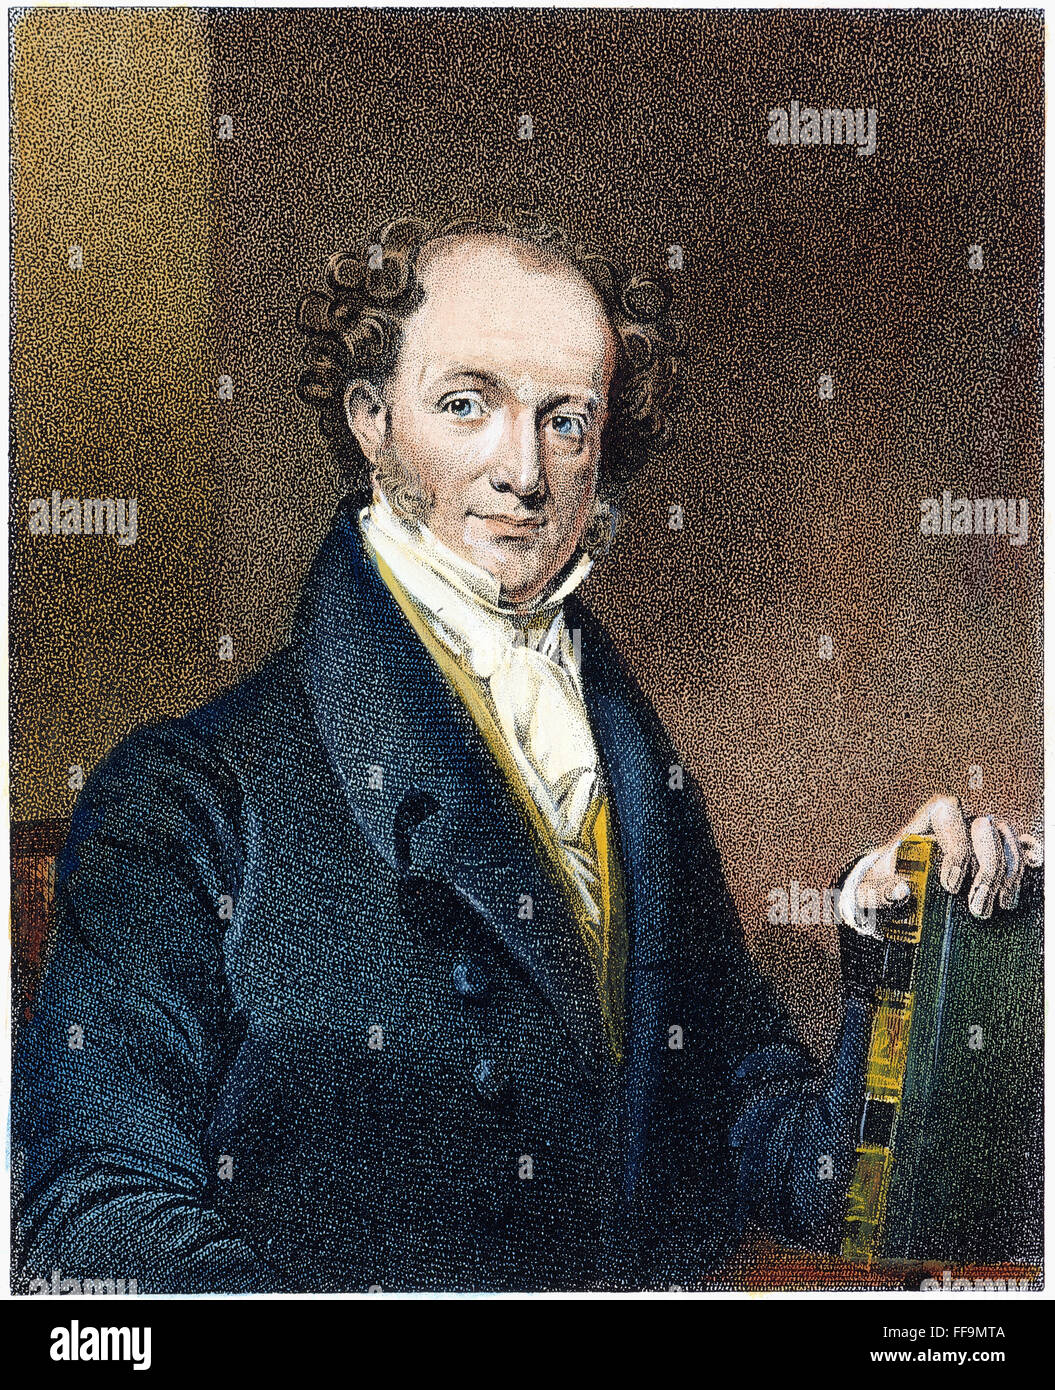 MARTIN VAN BUREN (1782-1862). /n8th President of the United States. Stipple engraving, 1836, after a painting by Henry Inman. Stock Photo